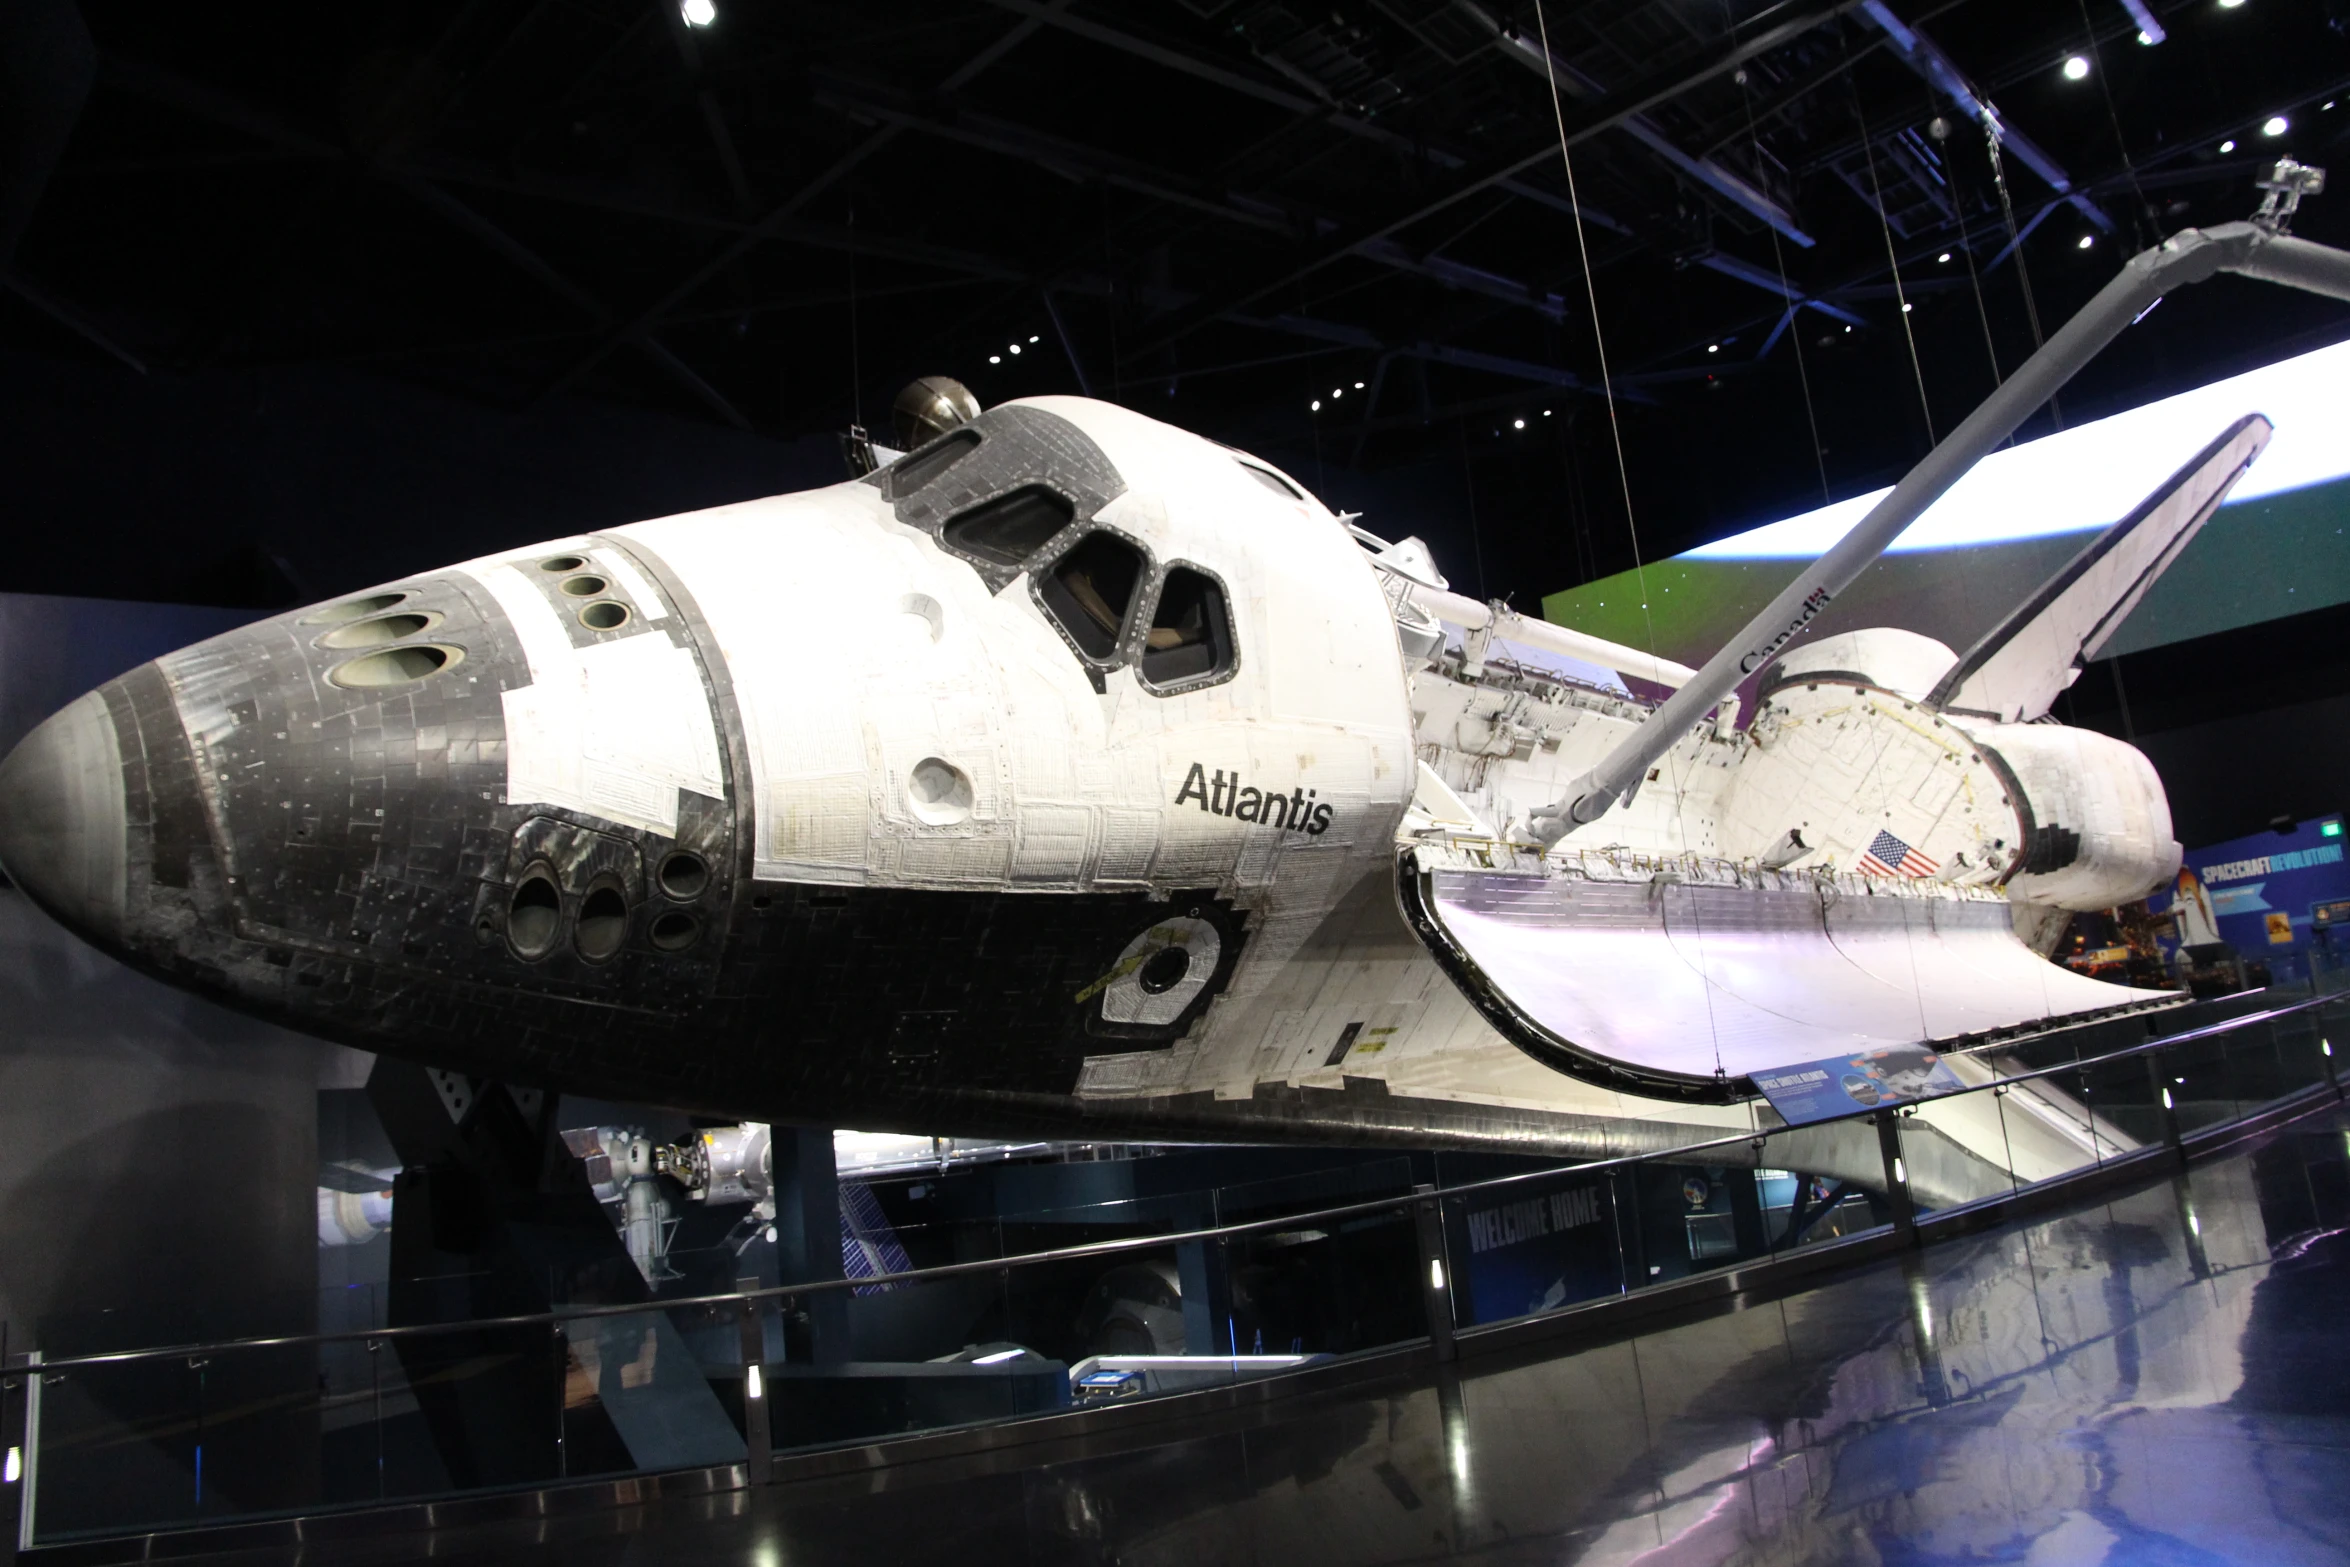 an antique space shuttle being displayed in a museum